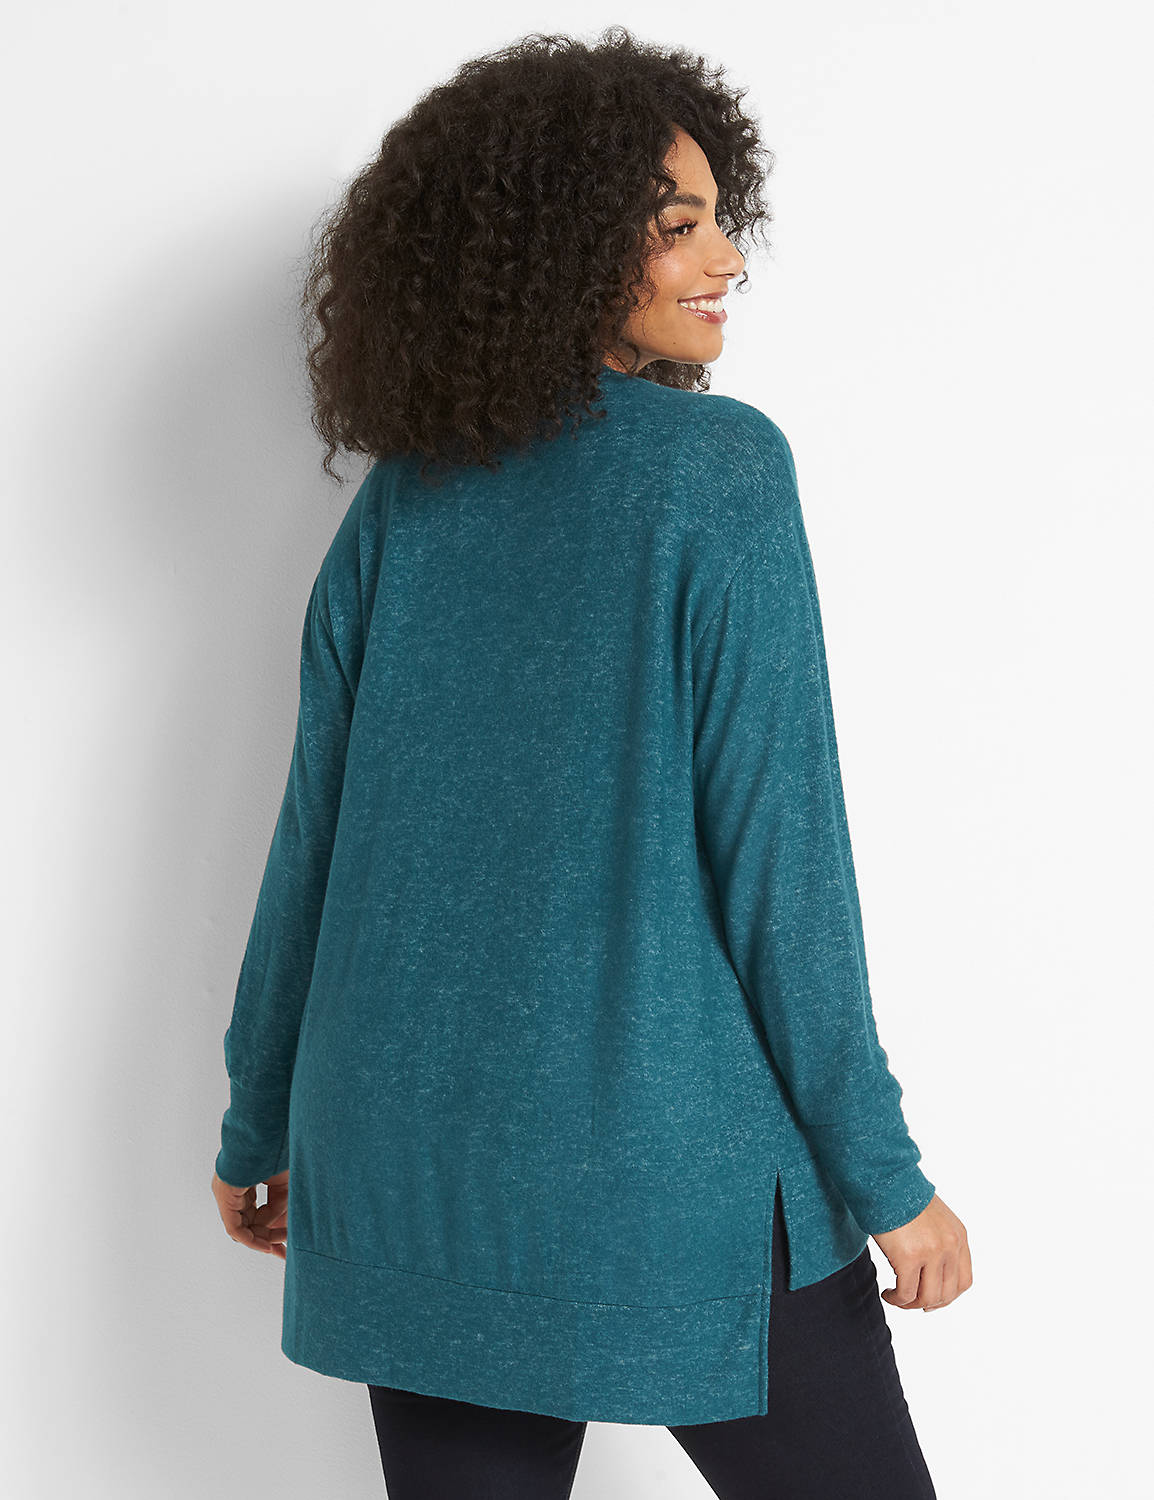 Long Sleeve Button Front Side Slit Over Piece 1124649:PANTONE Deep Teal:10/12 Product Image 2